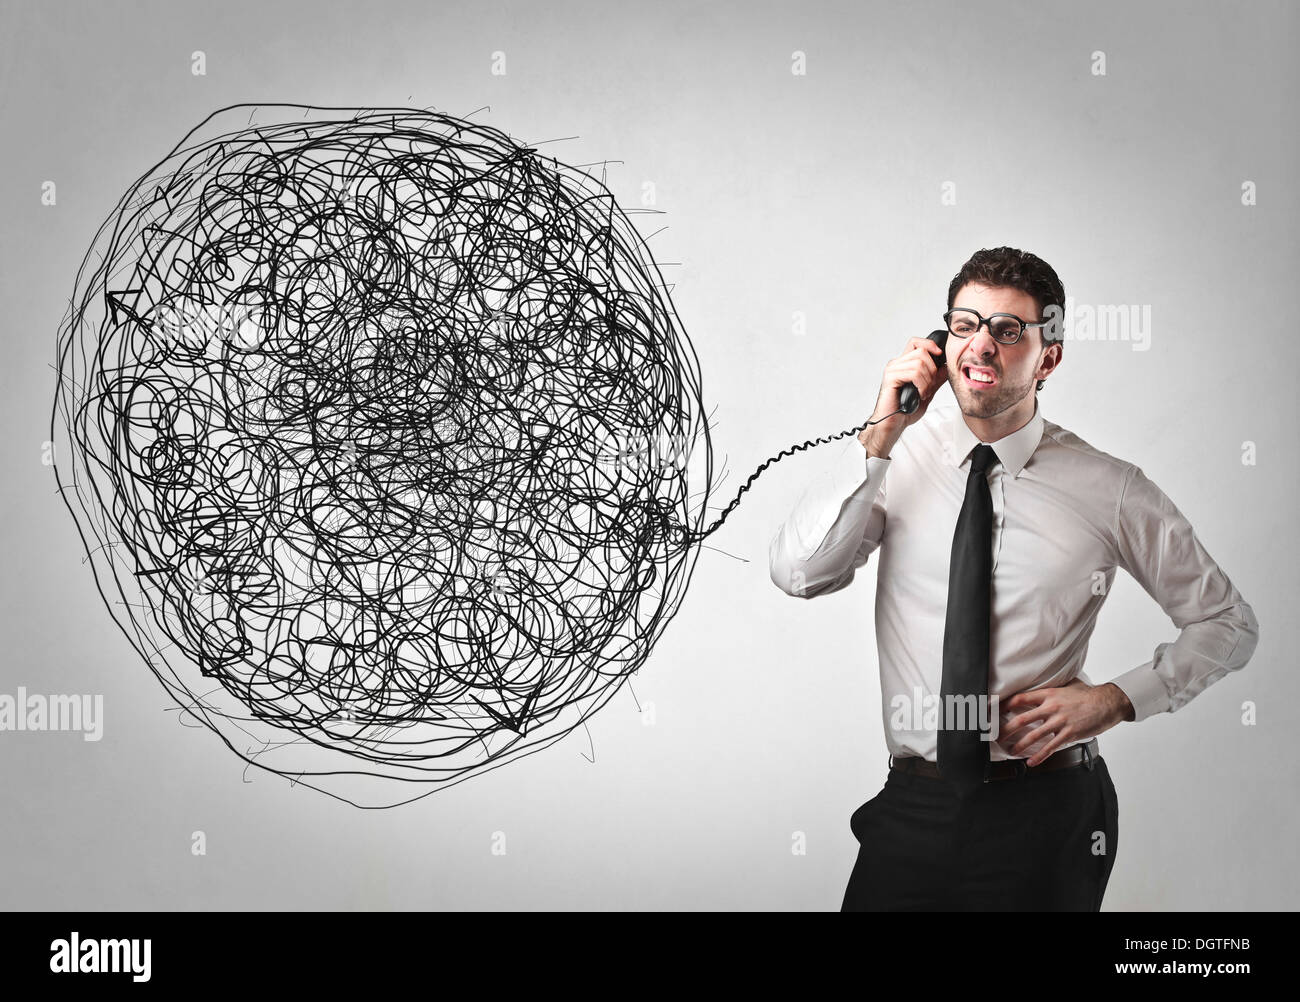 Office worker using a telephone with the wire very tangled Stock Photo